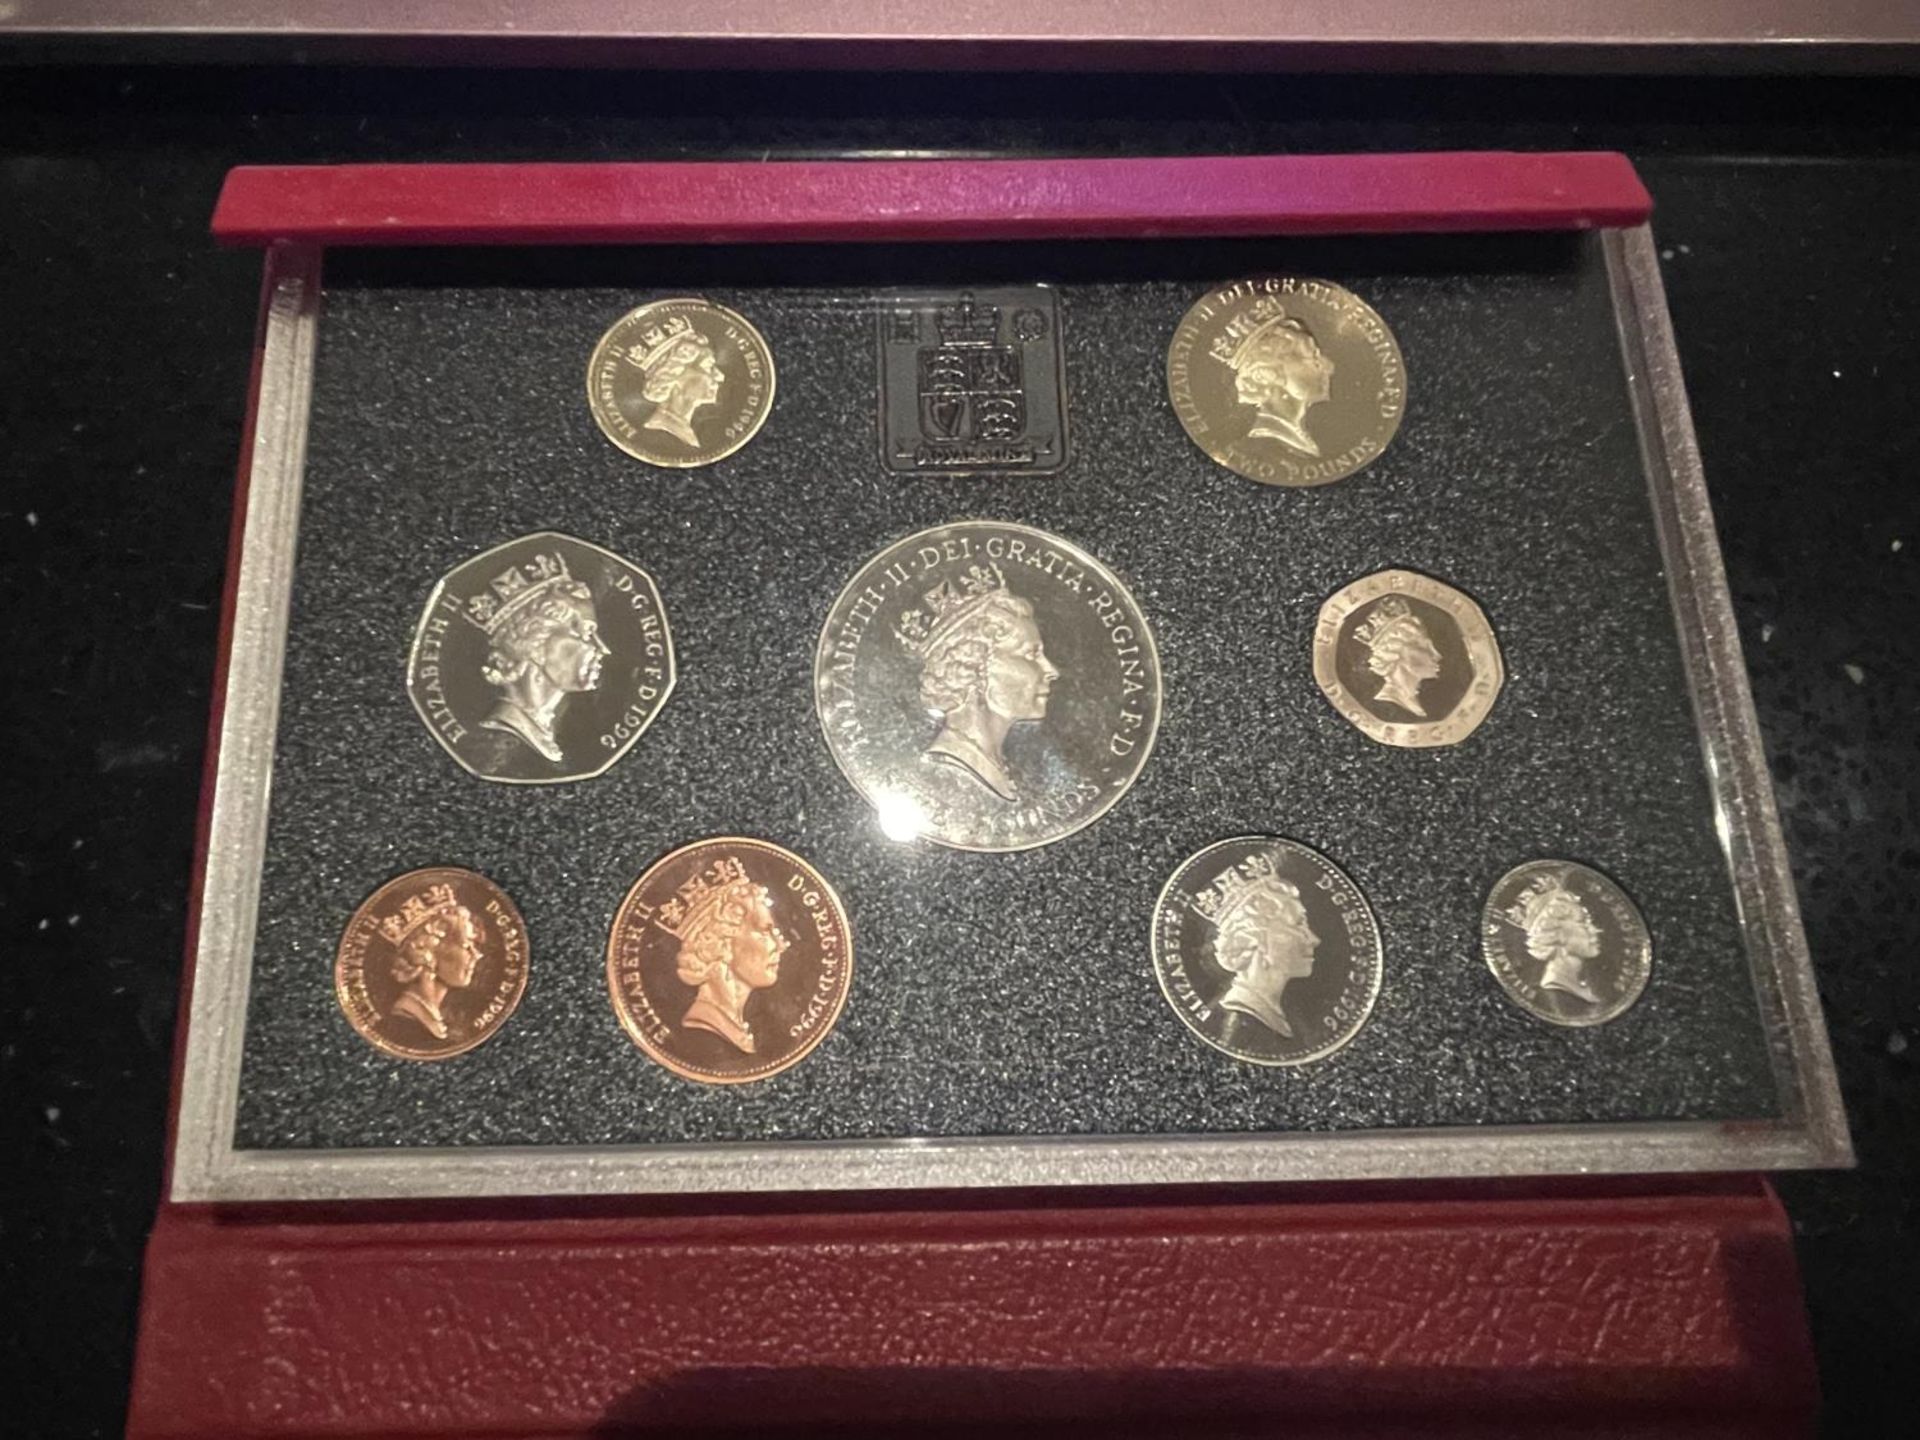 UK , ROYAL MINT , 1996 , COIN SET . PRISTINE CONDITION - Image 2 of 3